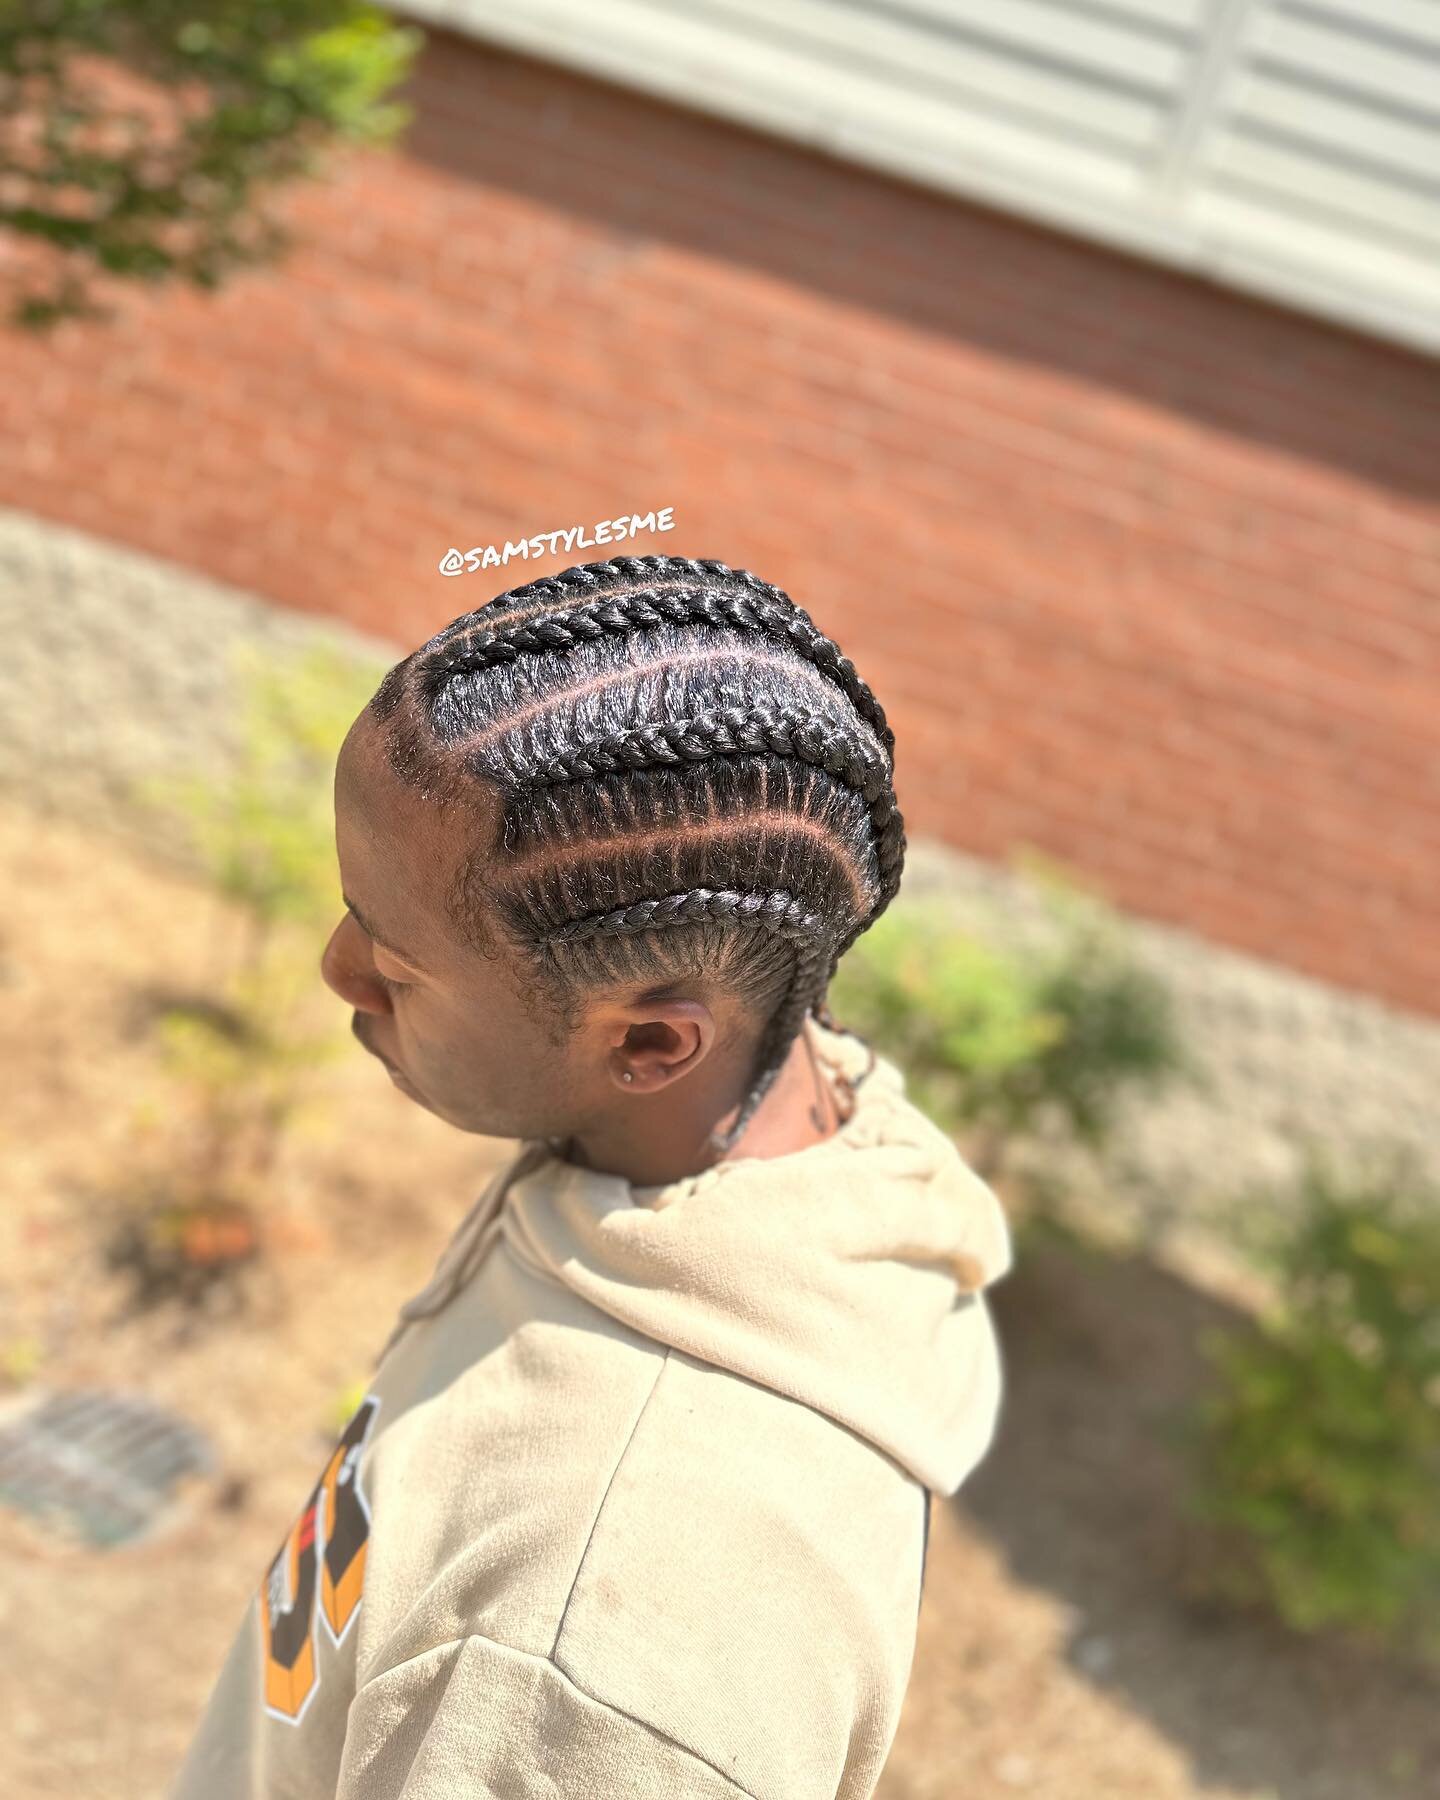 Thick hair is not a problem over here 💪🏼 #samstylesme #menbraidstyles #charlottemenbraids #cltbraids #charlottebarber #charlottehair #charlottehairstylist #charlottenc